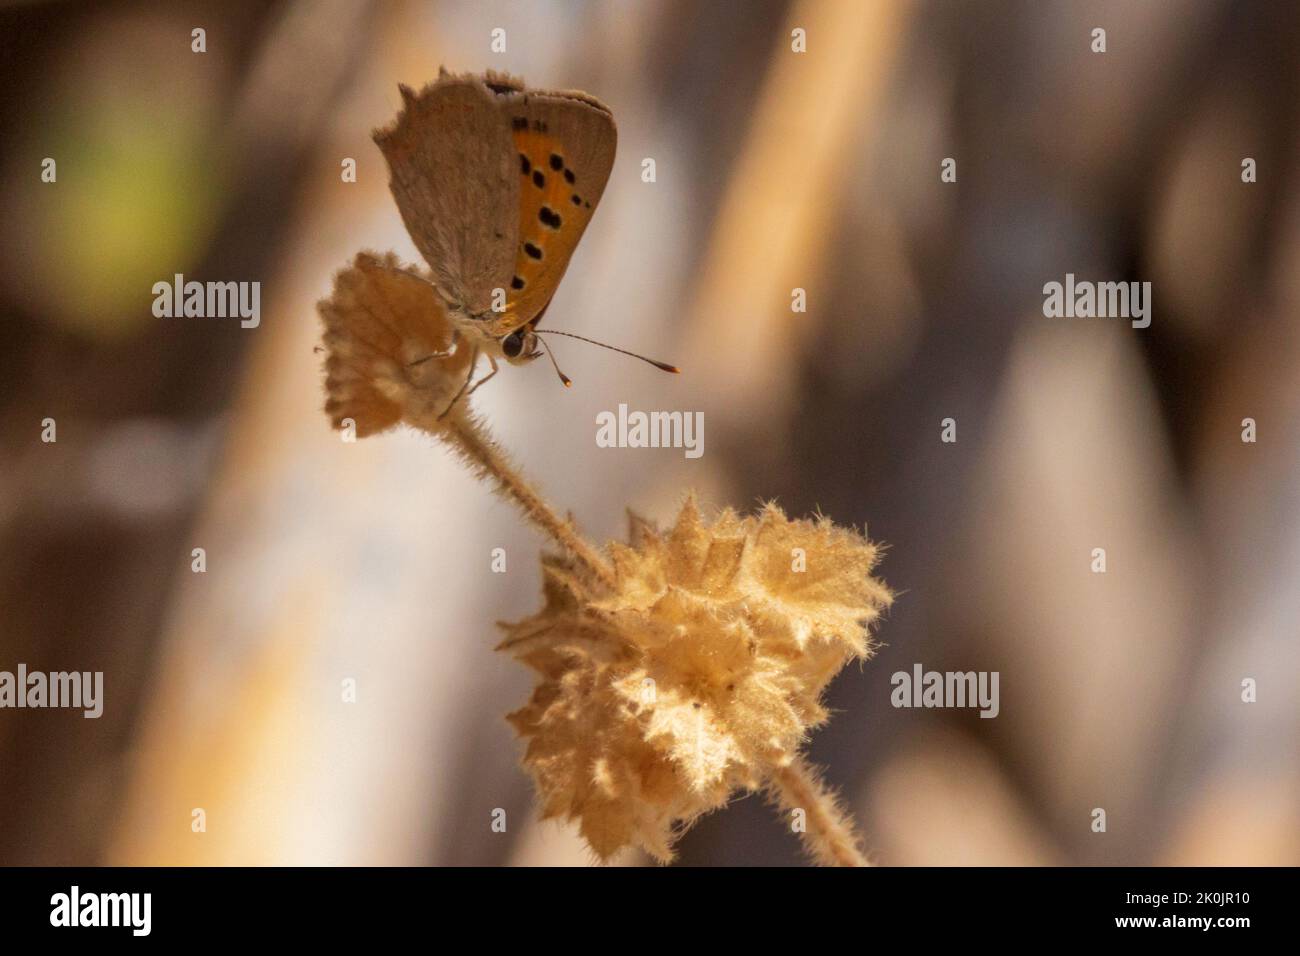 Lycaena phlaeas, Small Copper Butterfly Stock Photo